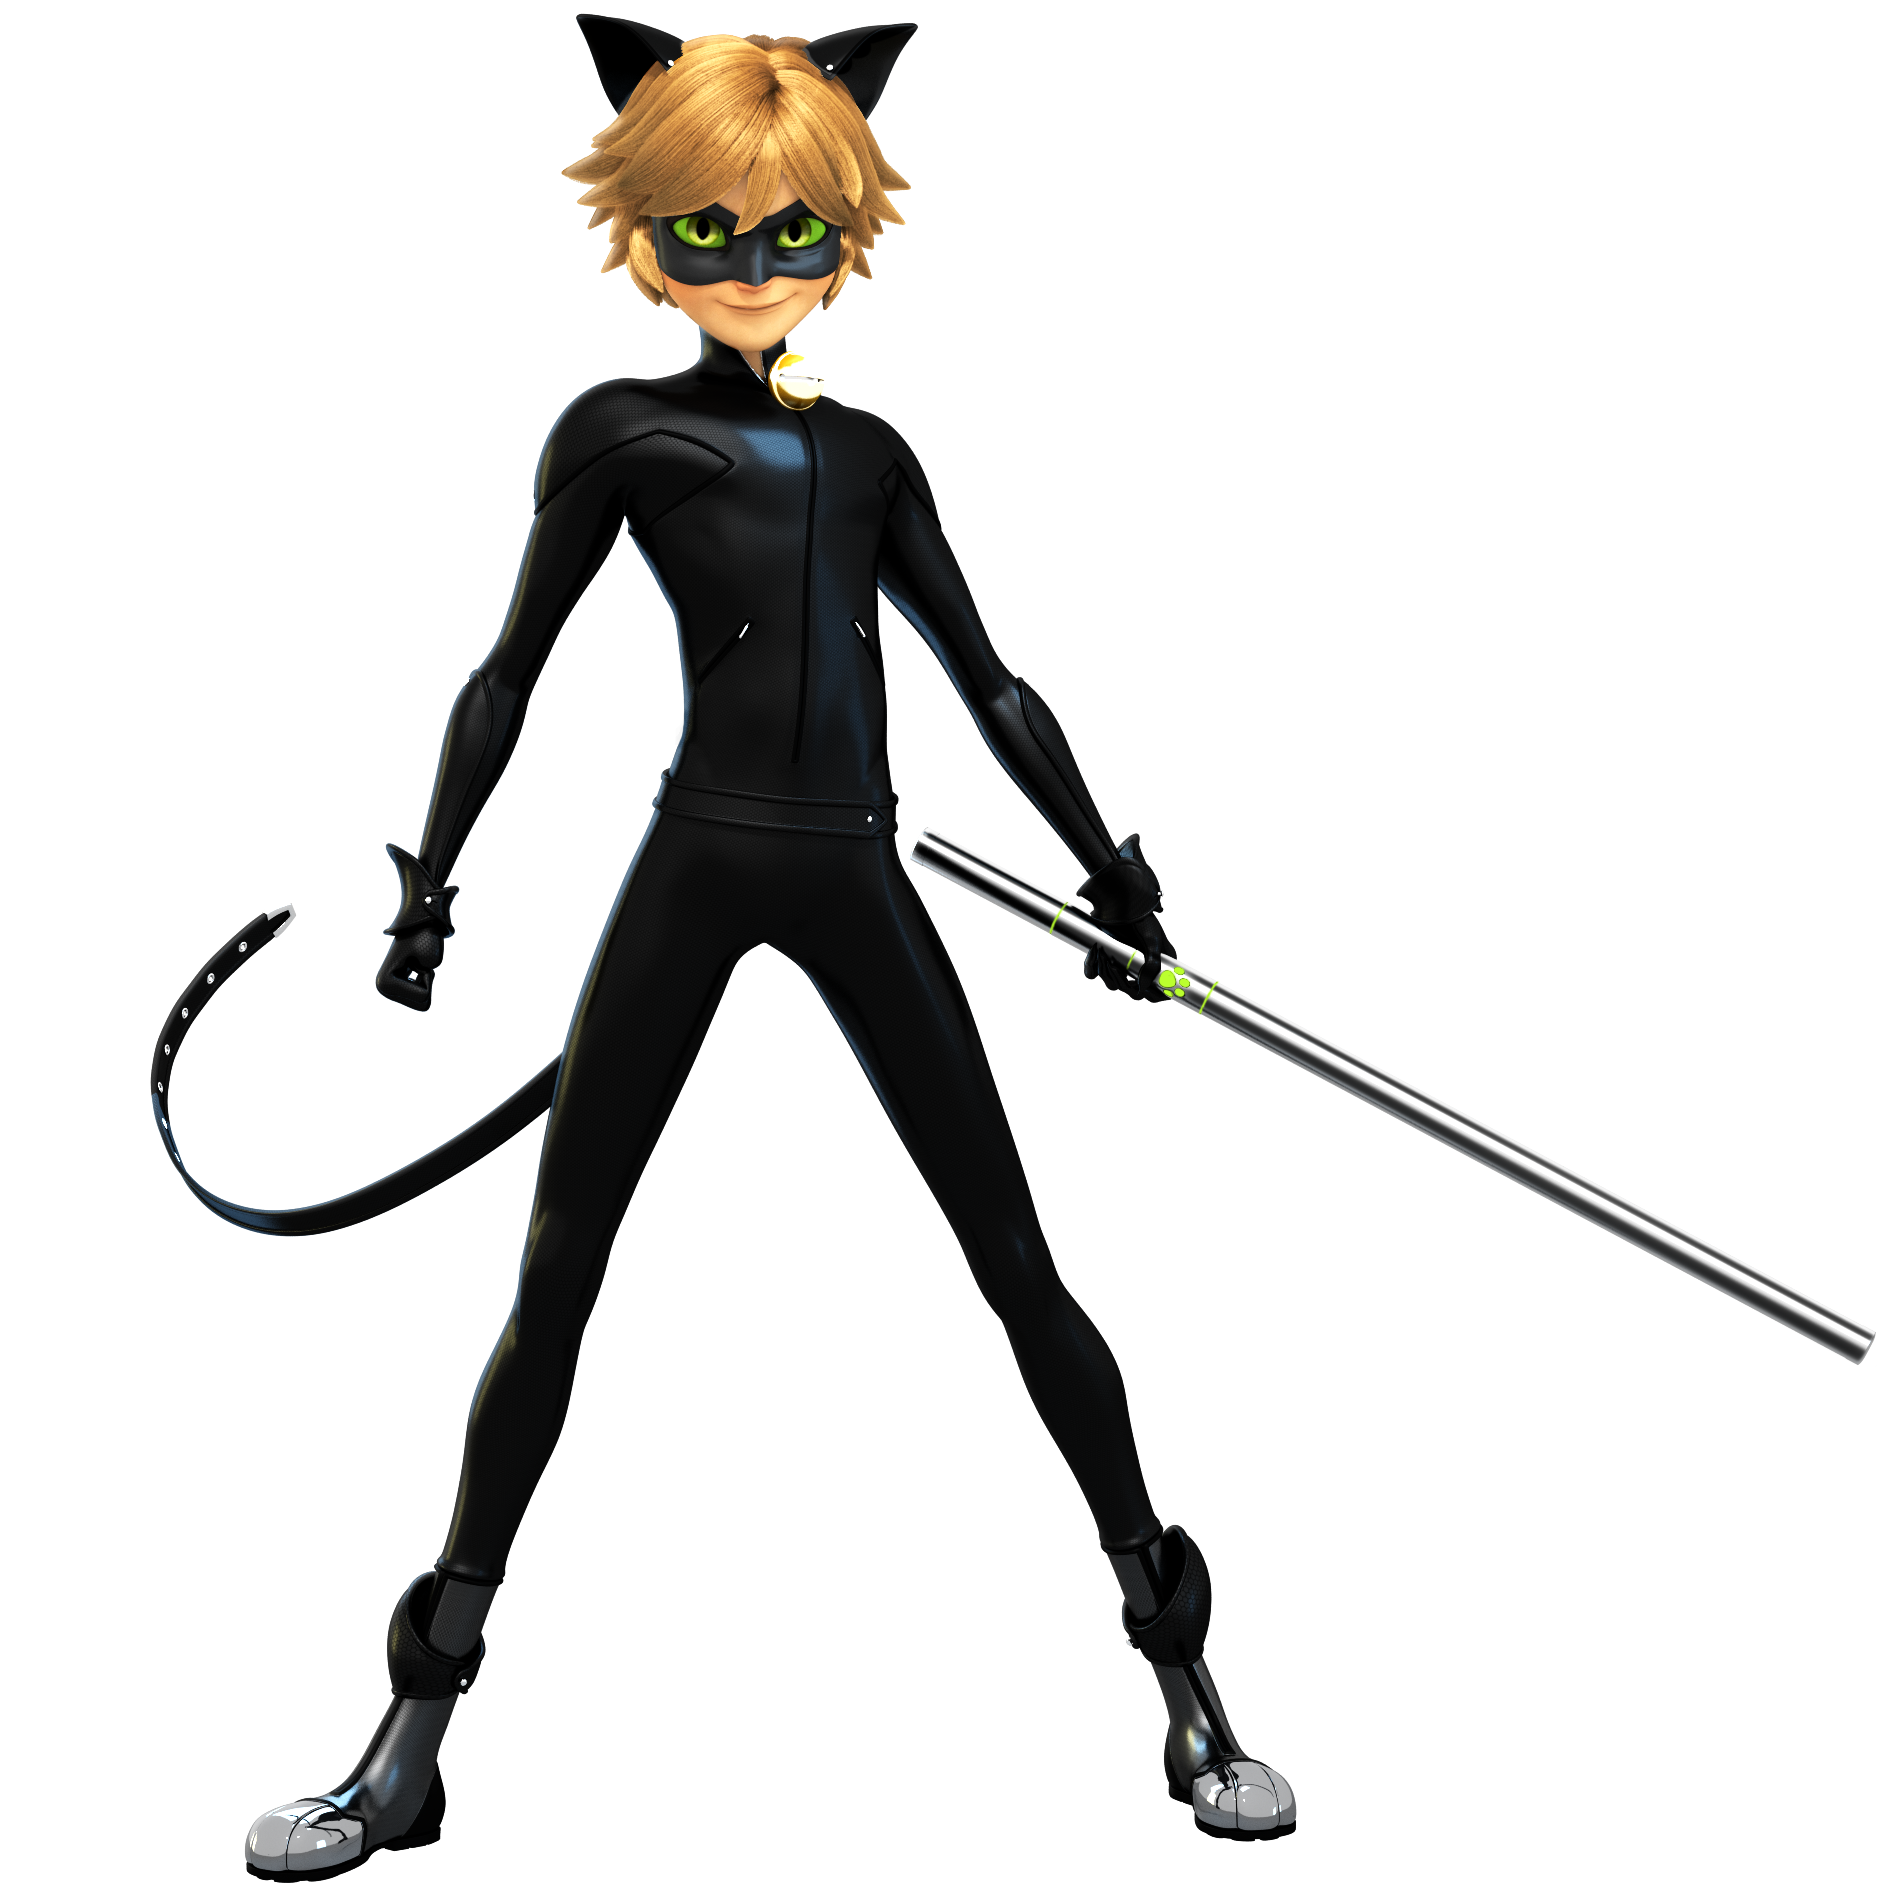 Miraculous Tales of Ladybug And Cat Noir Series PNG Free Download